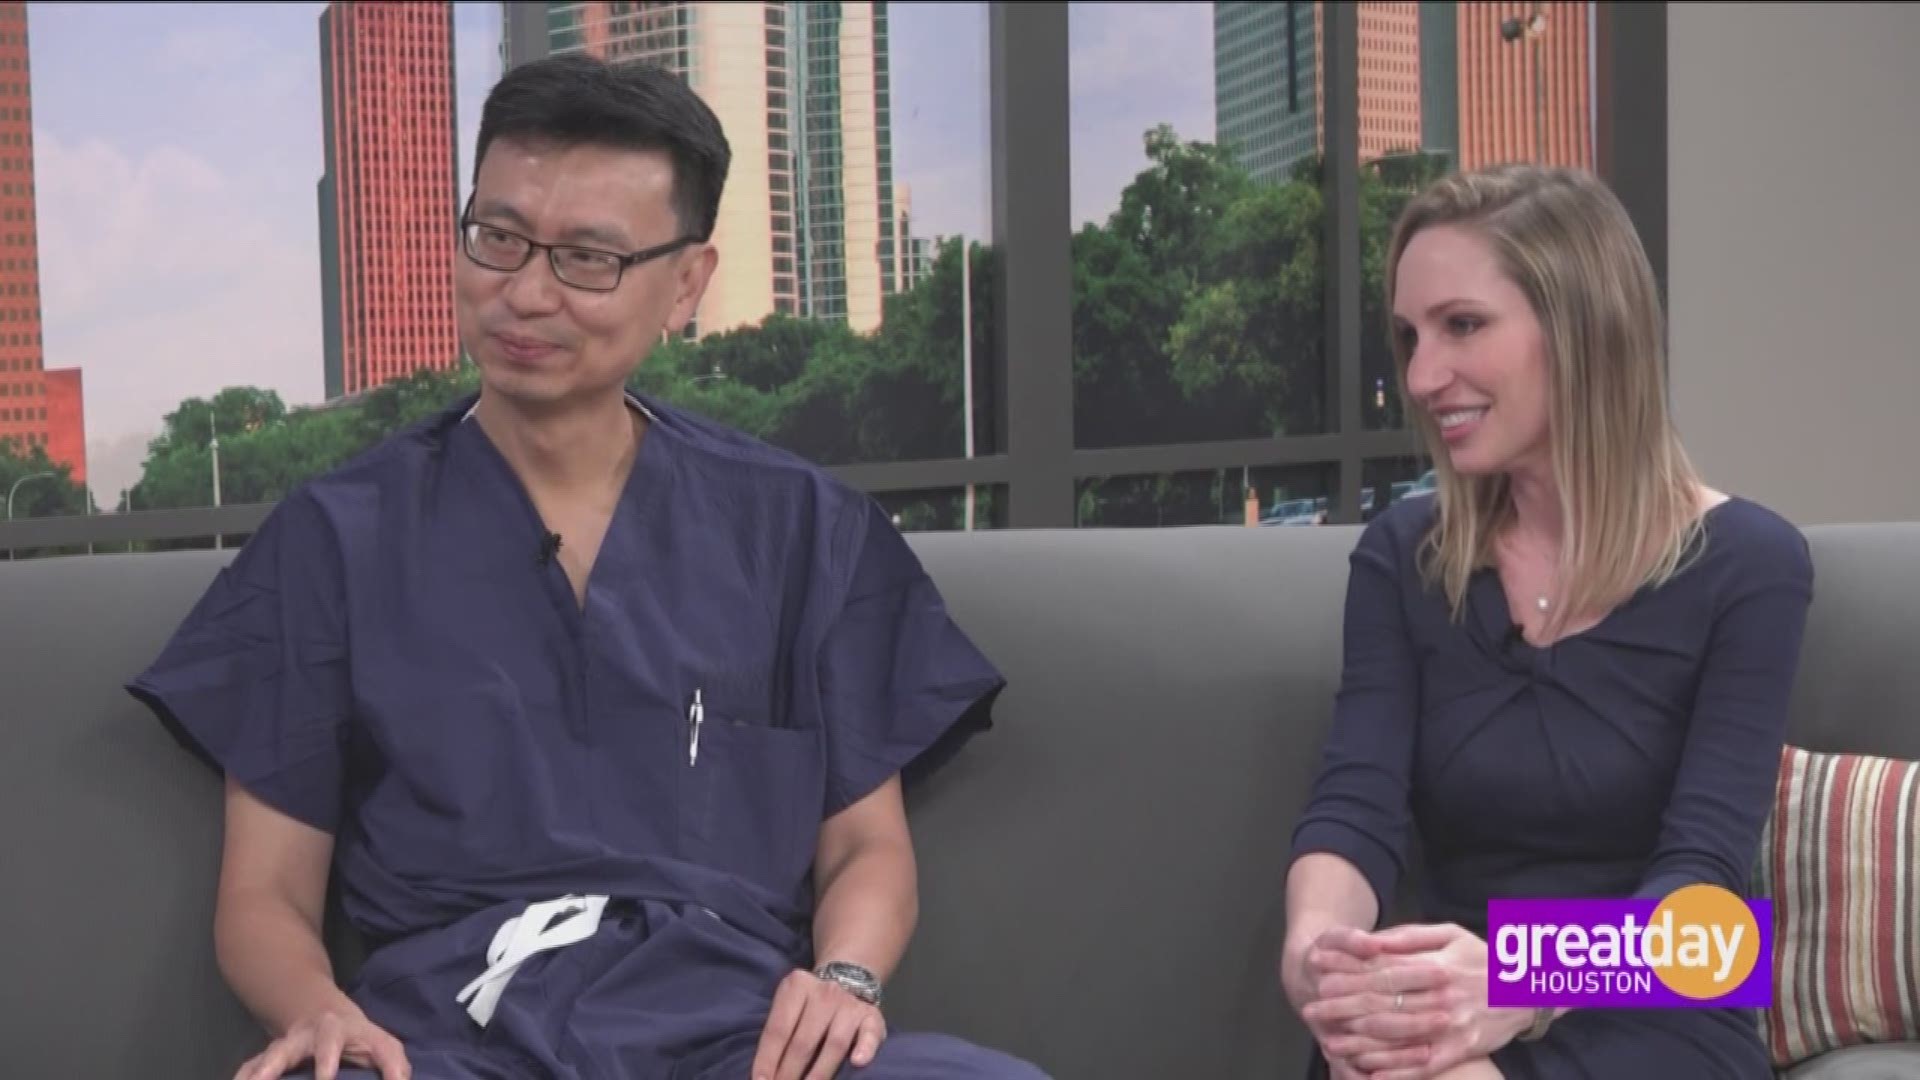 Botox can reduce the appearance of wrinkles, but did you know it can help with migraines & excessive sweating?  Dr. Tang Ho explains the many benefits of Botox.